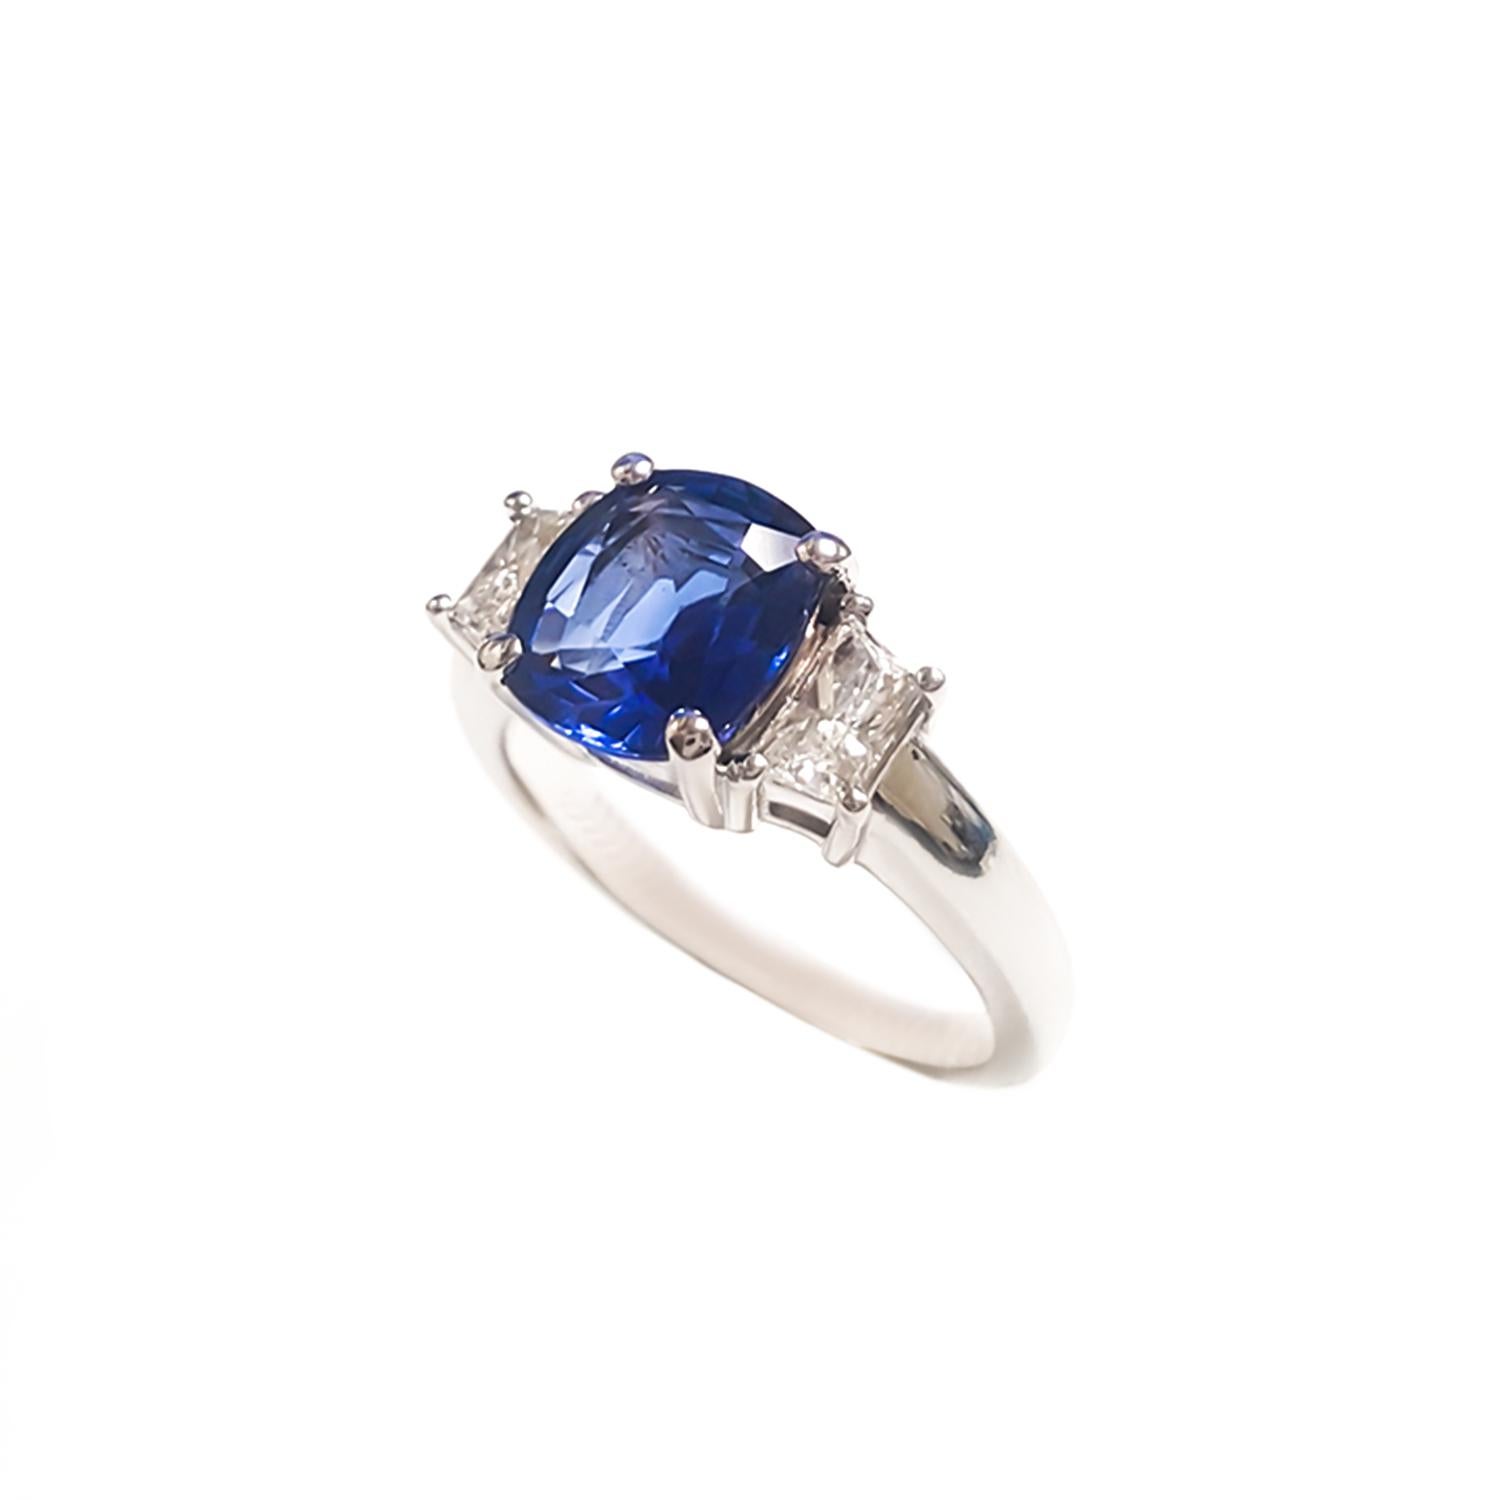 Contemporary Ladies 14 Karat White Gold Sapphire and Diamonds Ring For Sale